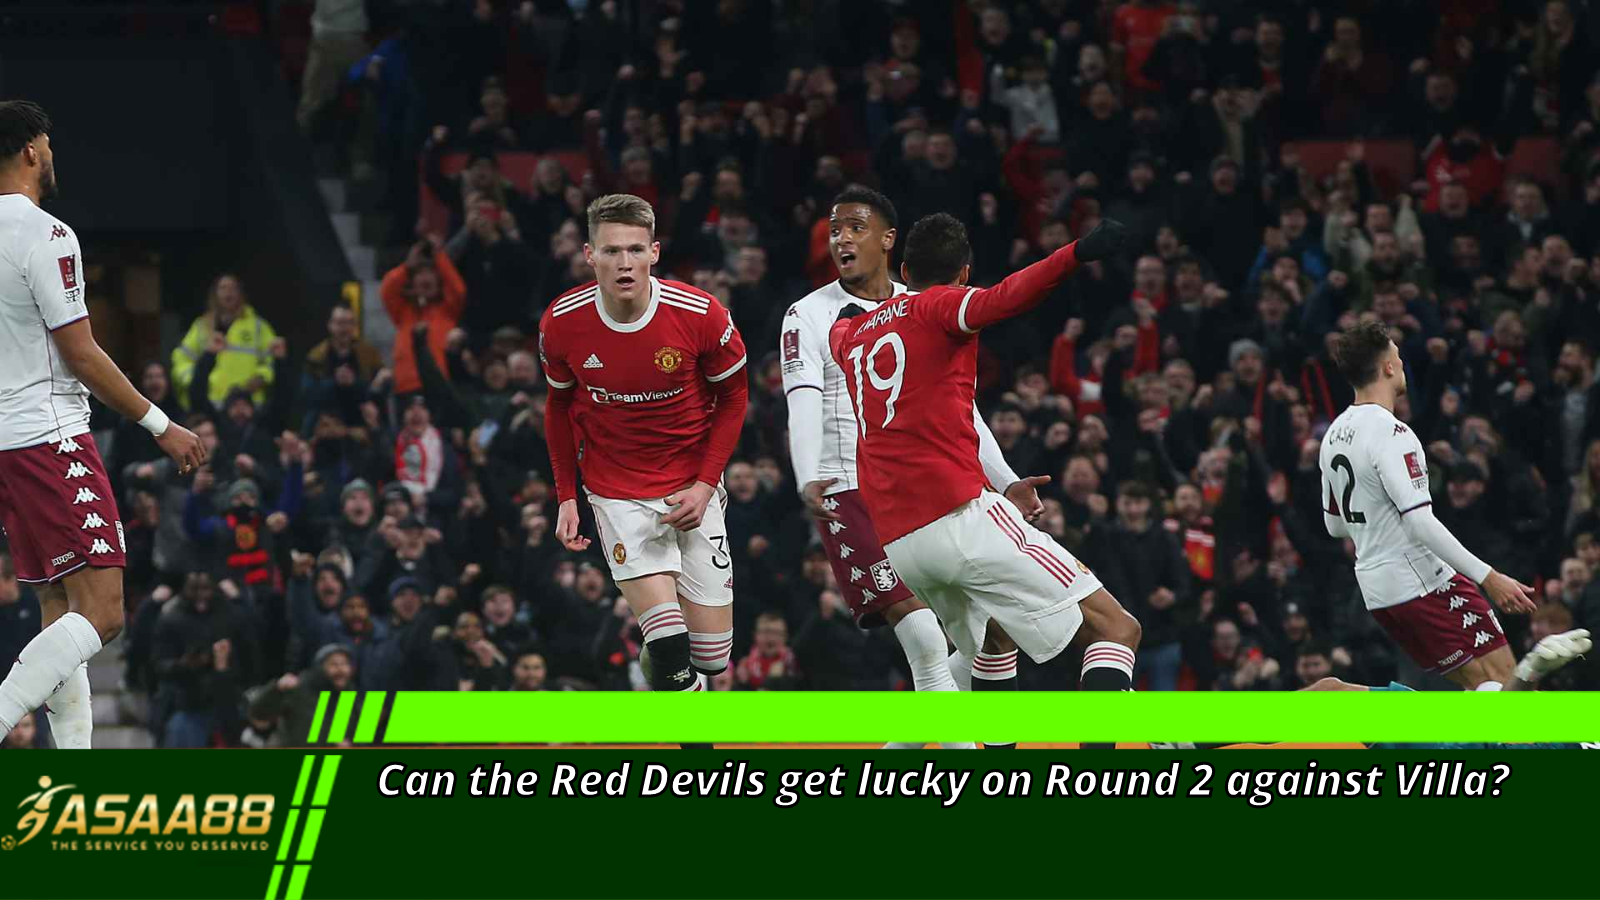 Can the Red Devils get lucky on Round 2 against Villa?